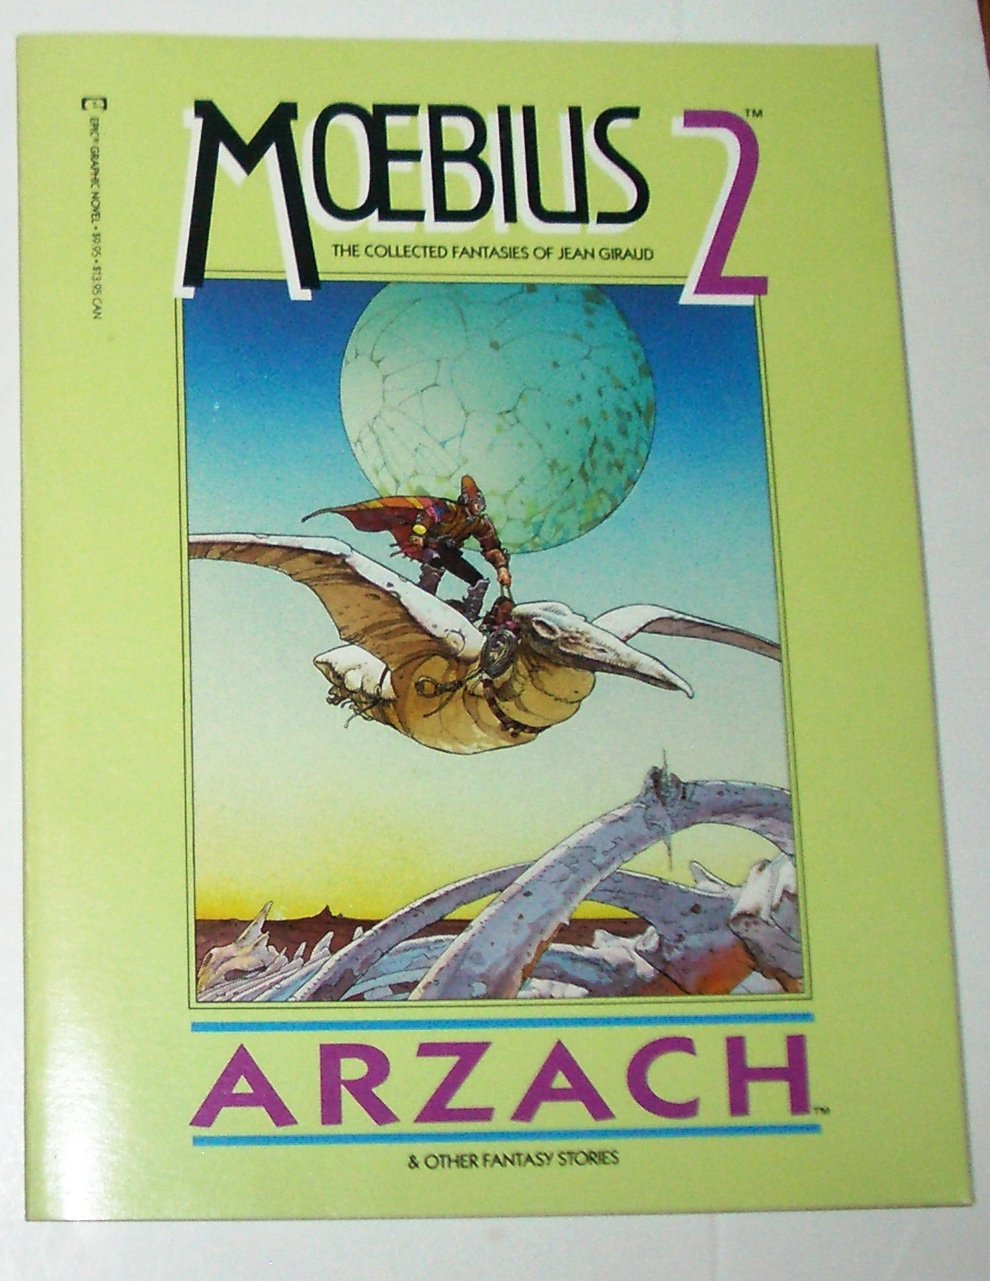 Moebius 2 Arzach The Collected Fantasies of Jean Giraud 1990 Trade Size Paperback